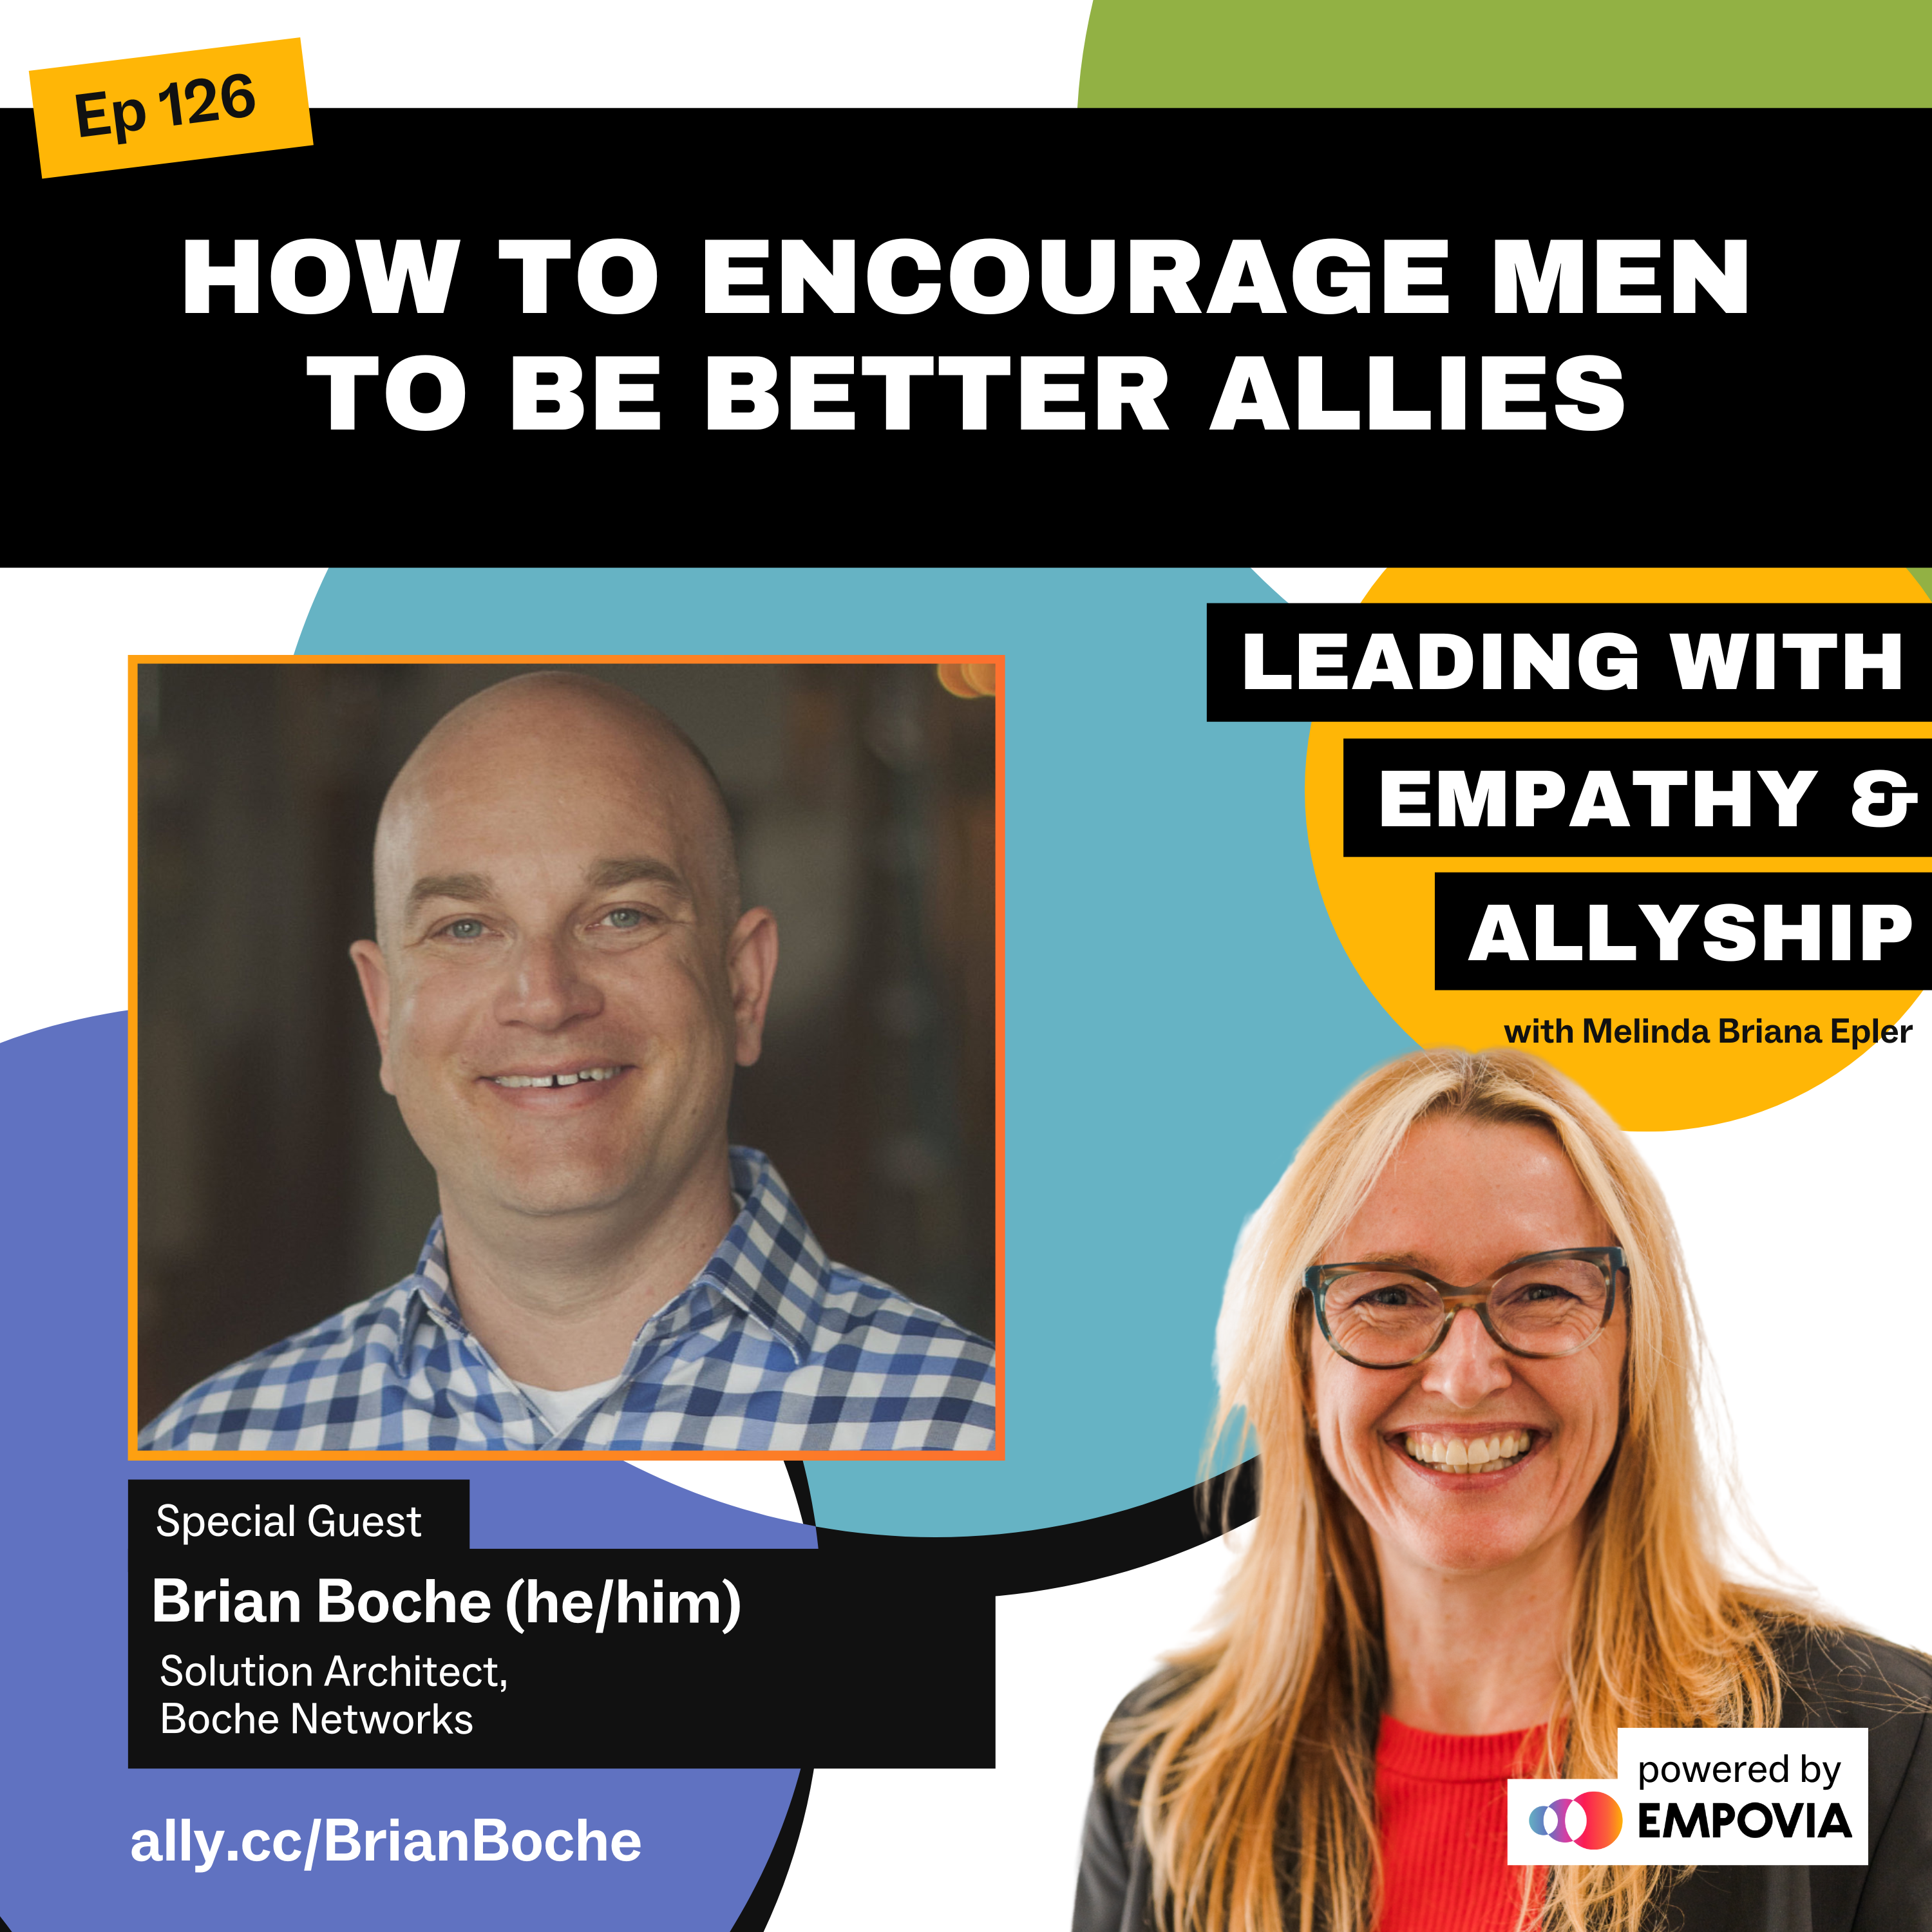 Leading With Empathy & Allyship promo and photos of Brian Boche, a bald straight White male with blue/white plaid shirt; and host Melinda Briana Epler, a White woman with blonde and red hair, glasses, red shirt, and black jacket.